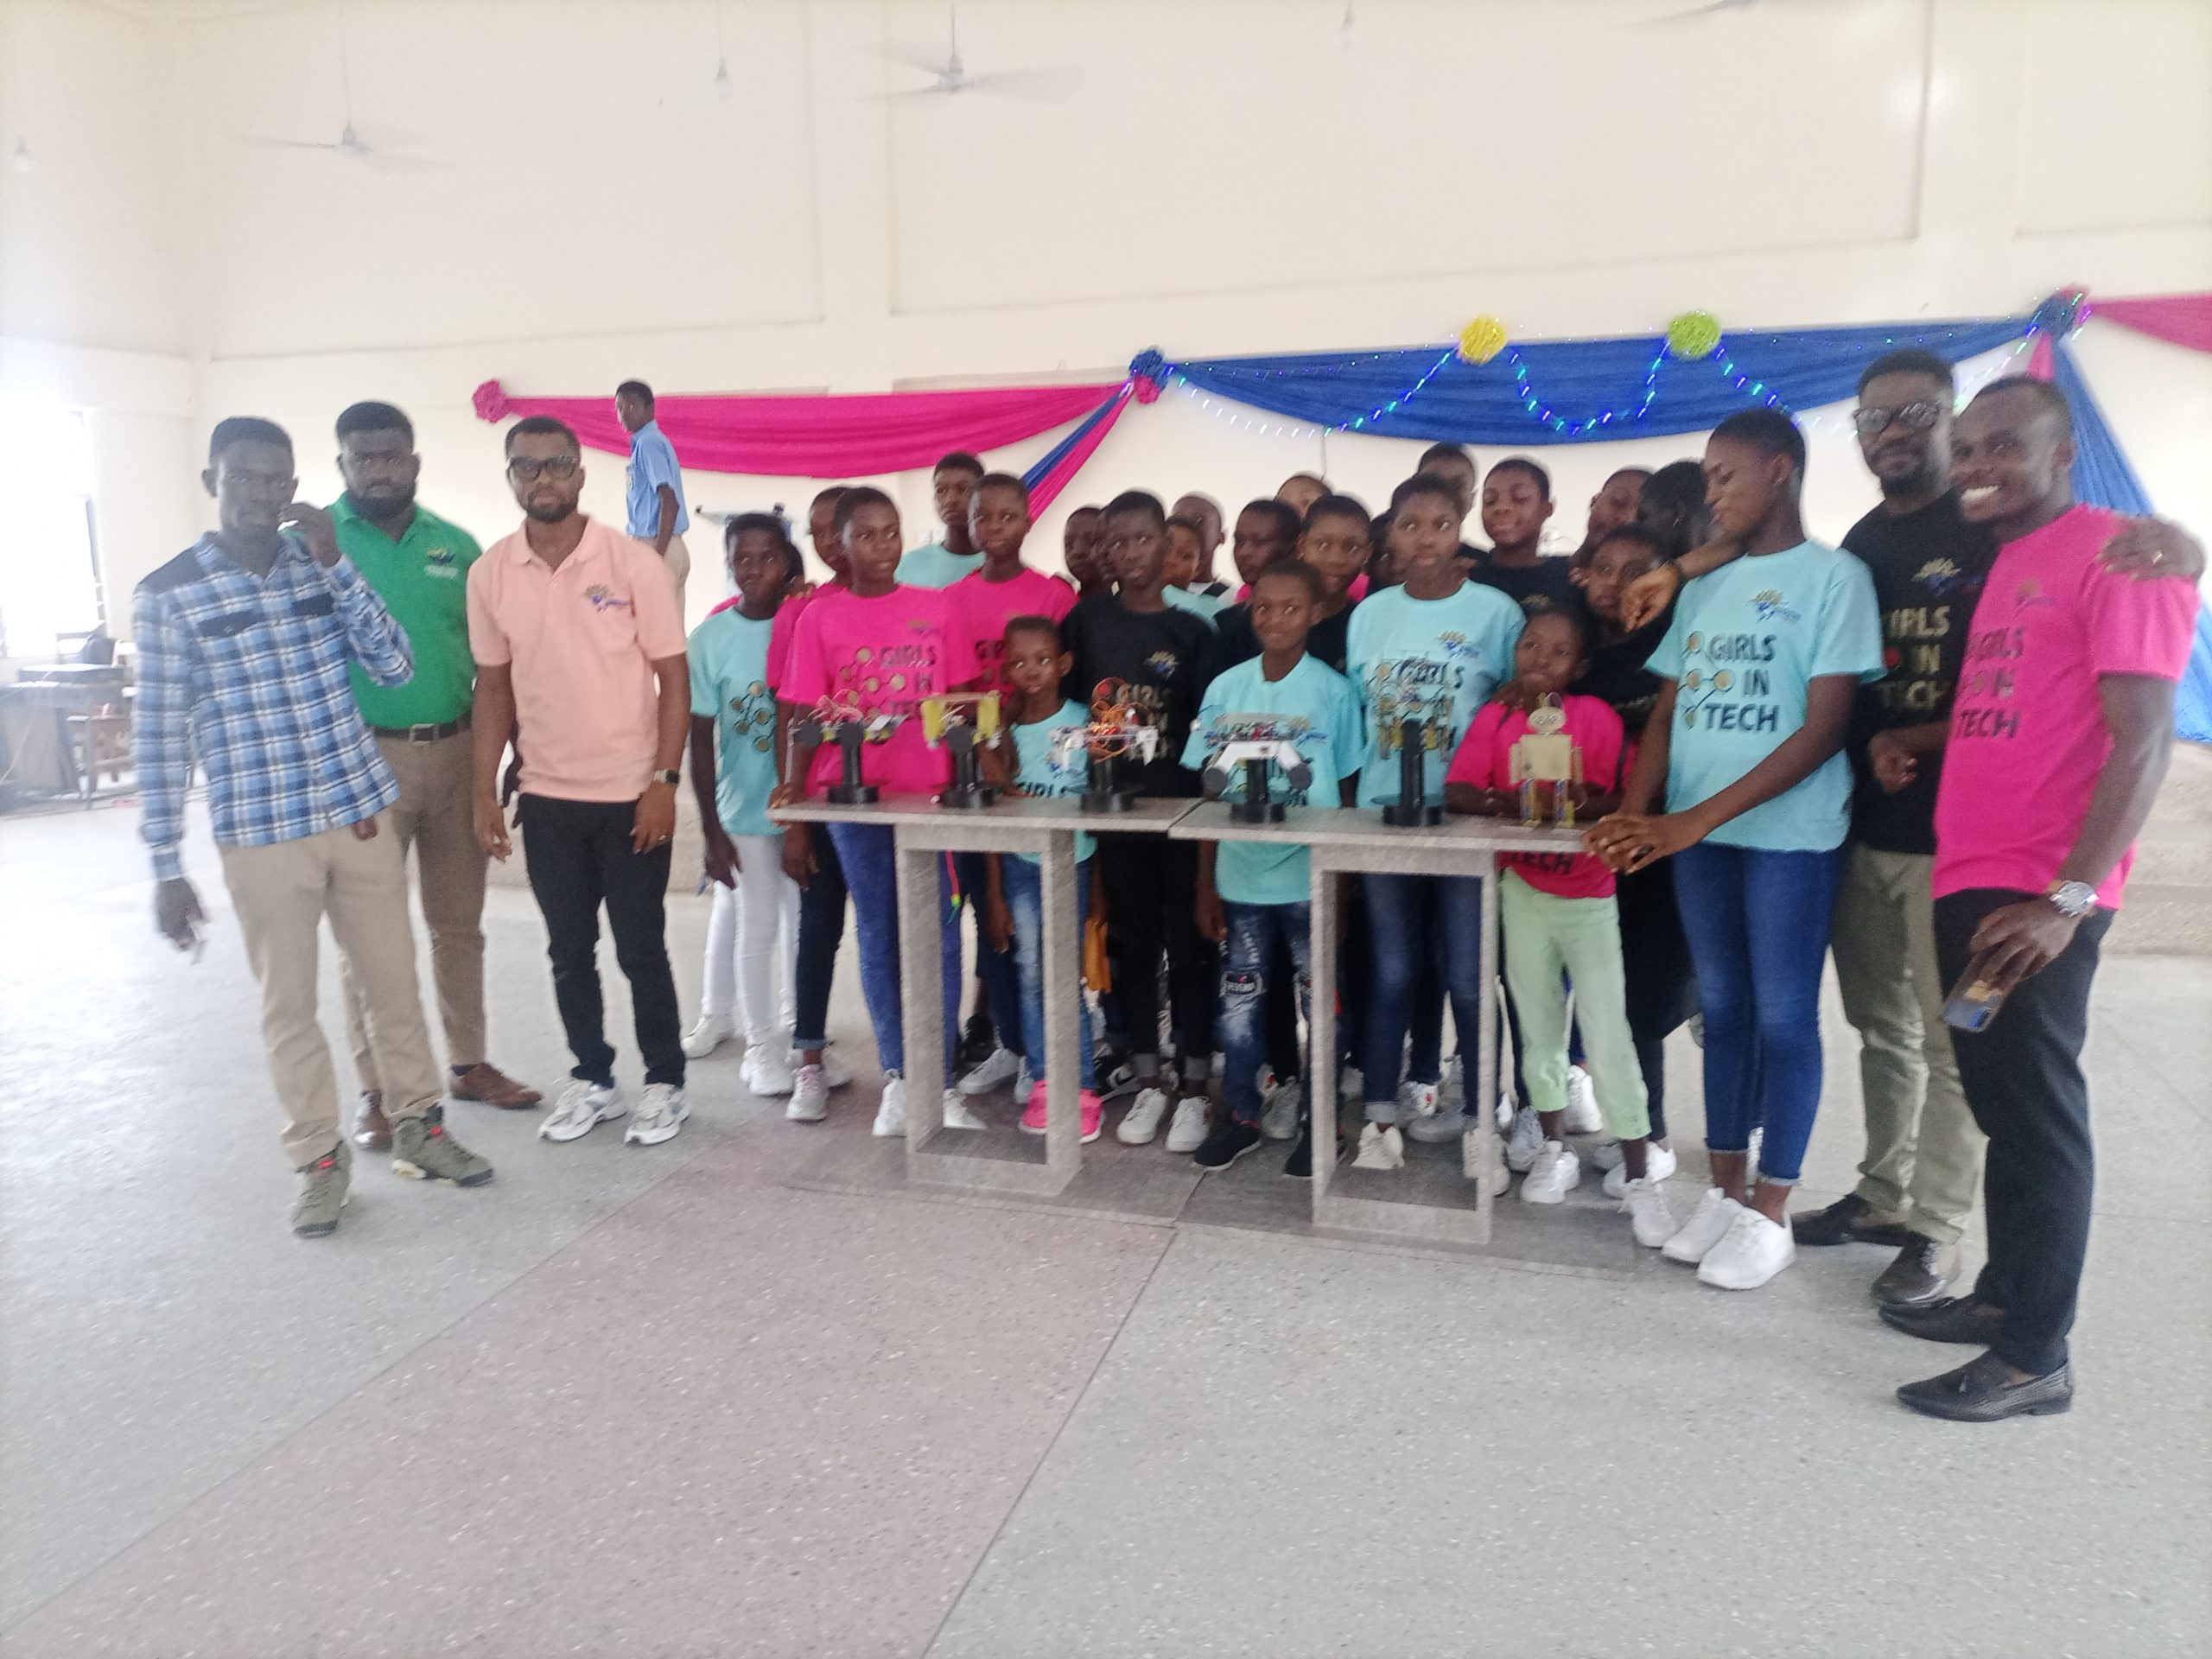 STEM Education: SafeFuture Ghana debuts “Girls in Tech” Programme to empower young girls at Kpetoe- DETAILS 